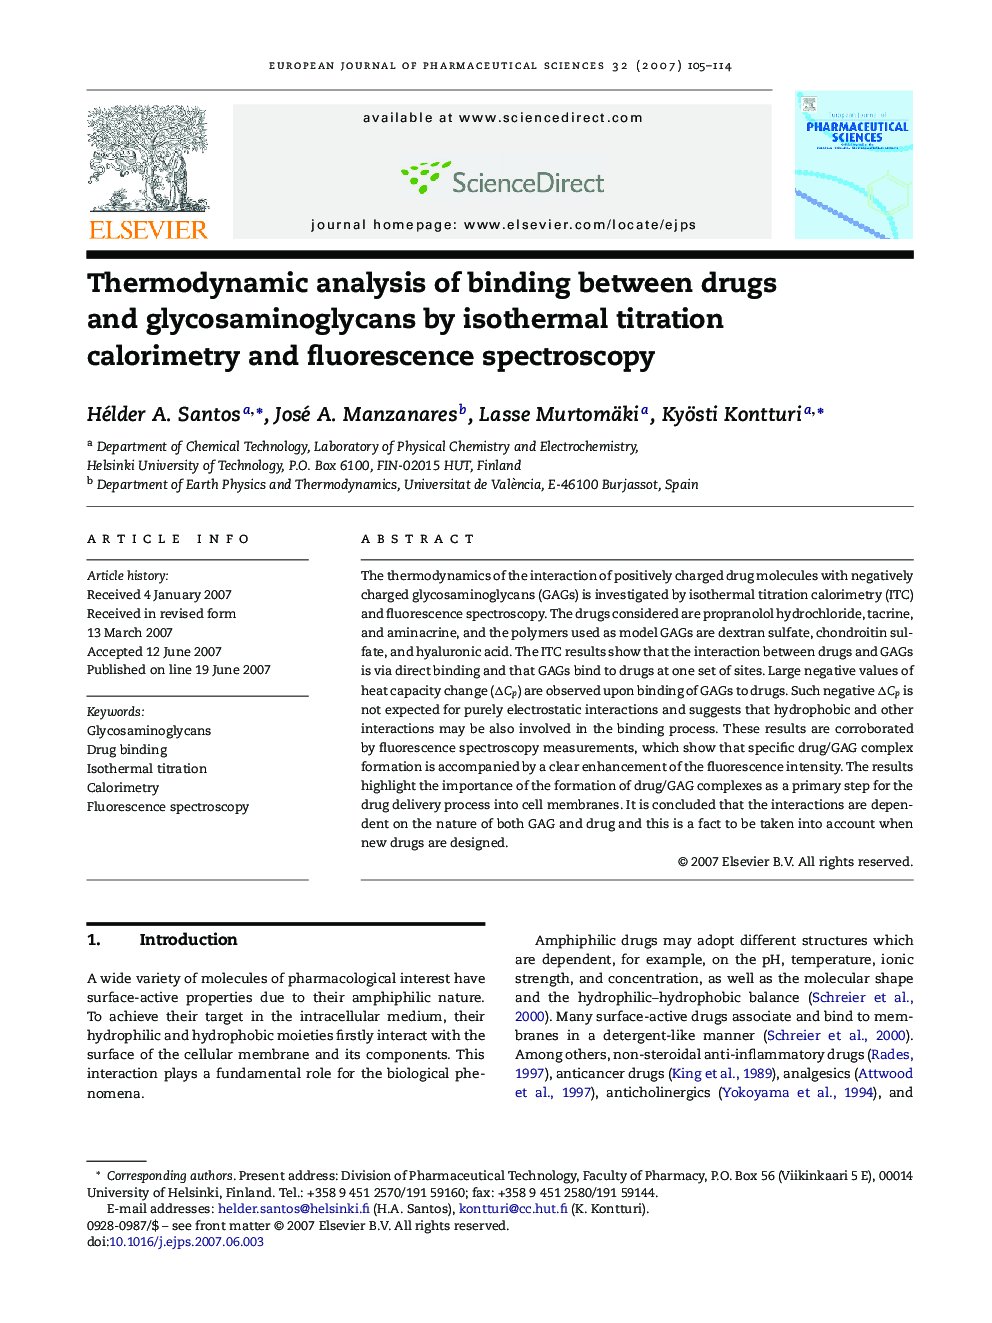 Thermodynamic analysis of binding between drugs and glycosaminoglycans by isothermal titration calorimetry and fluorescence spectroscopy